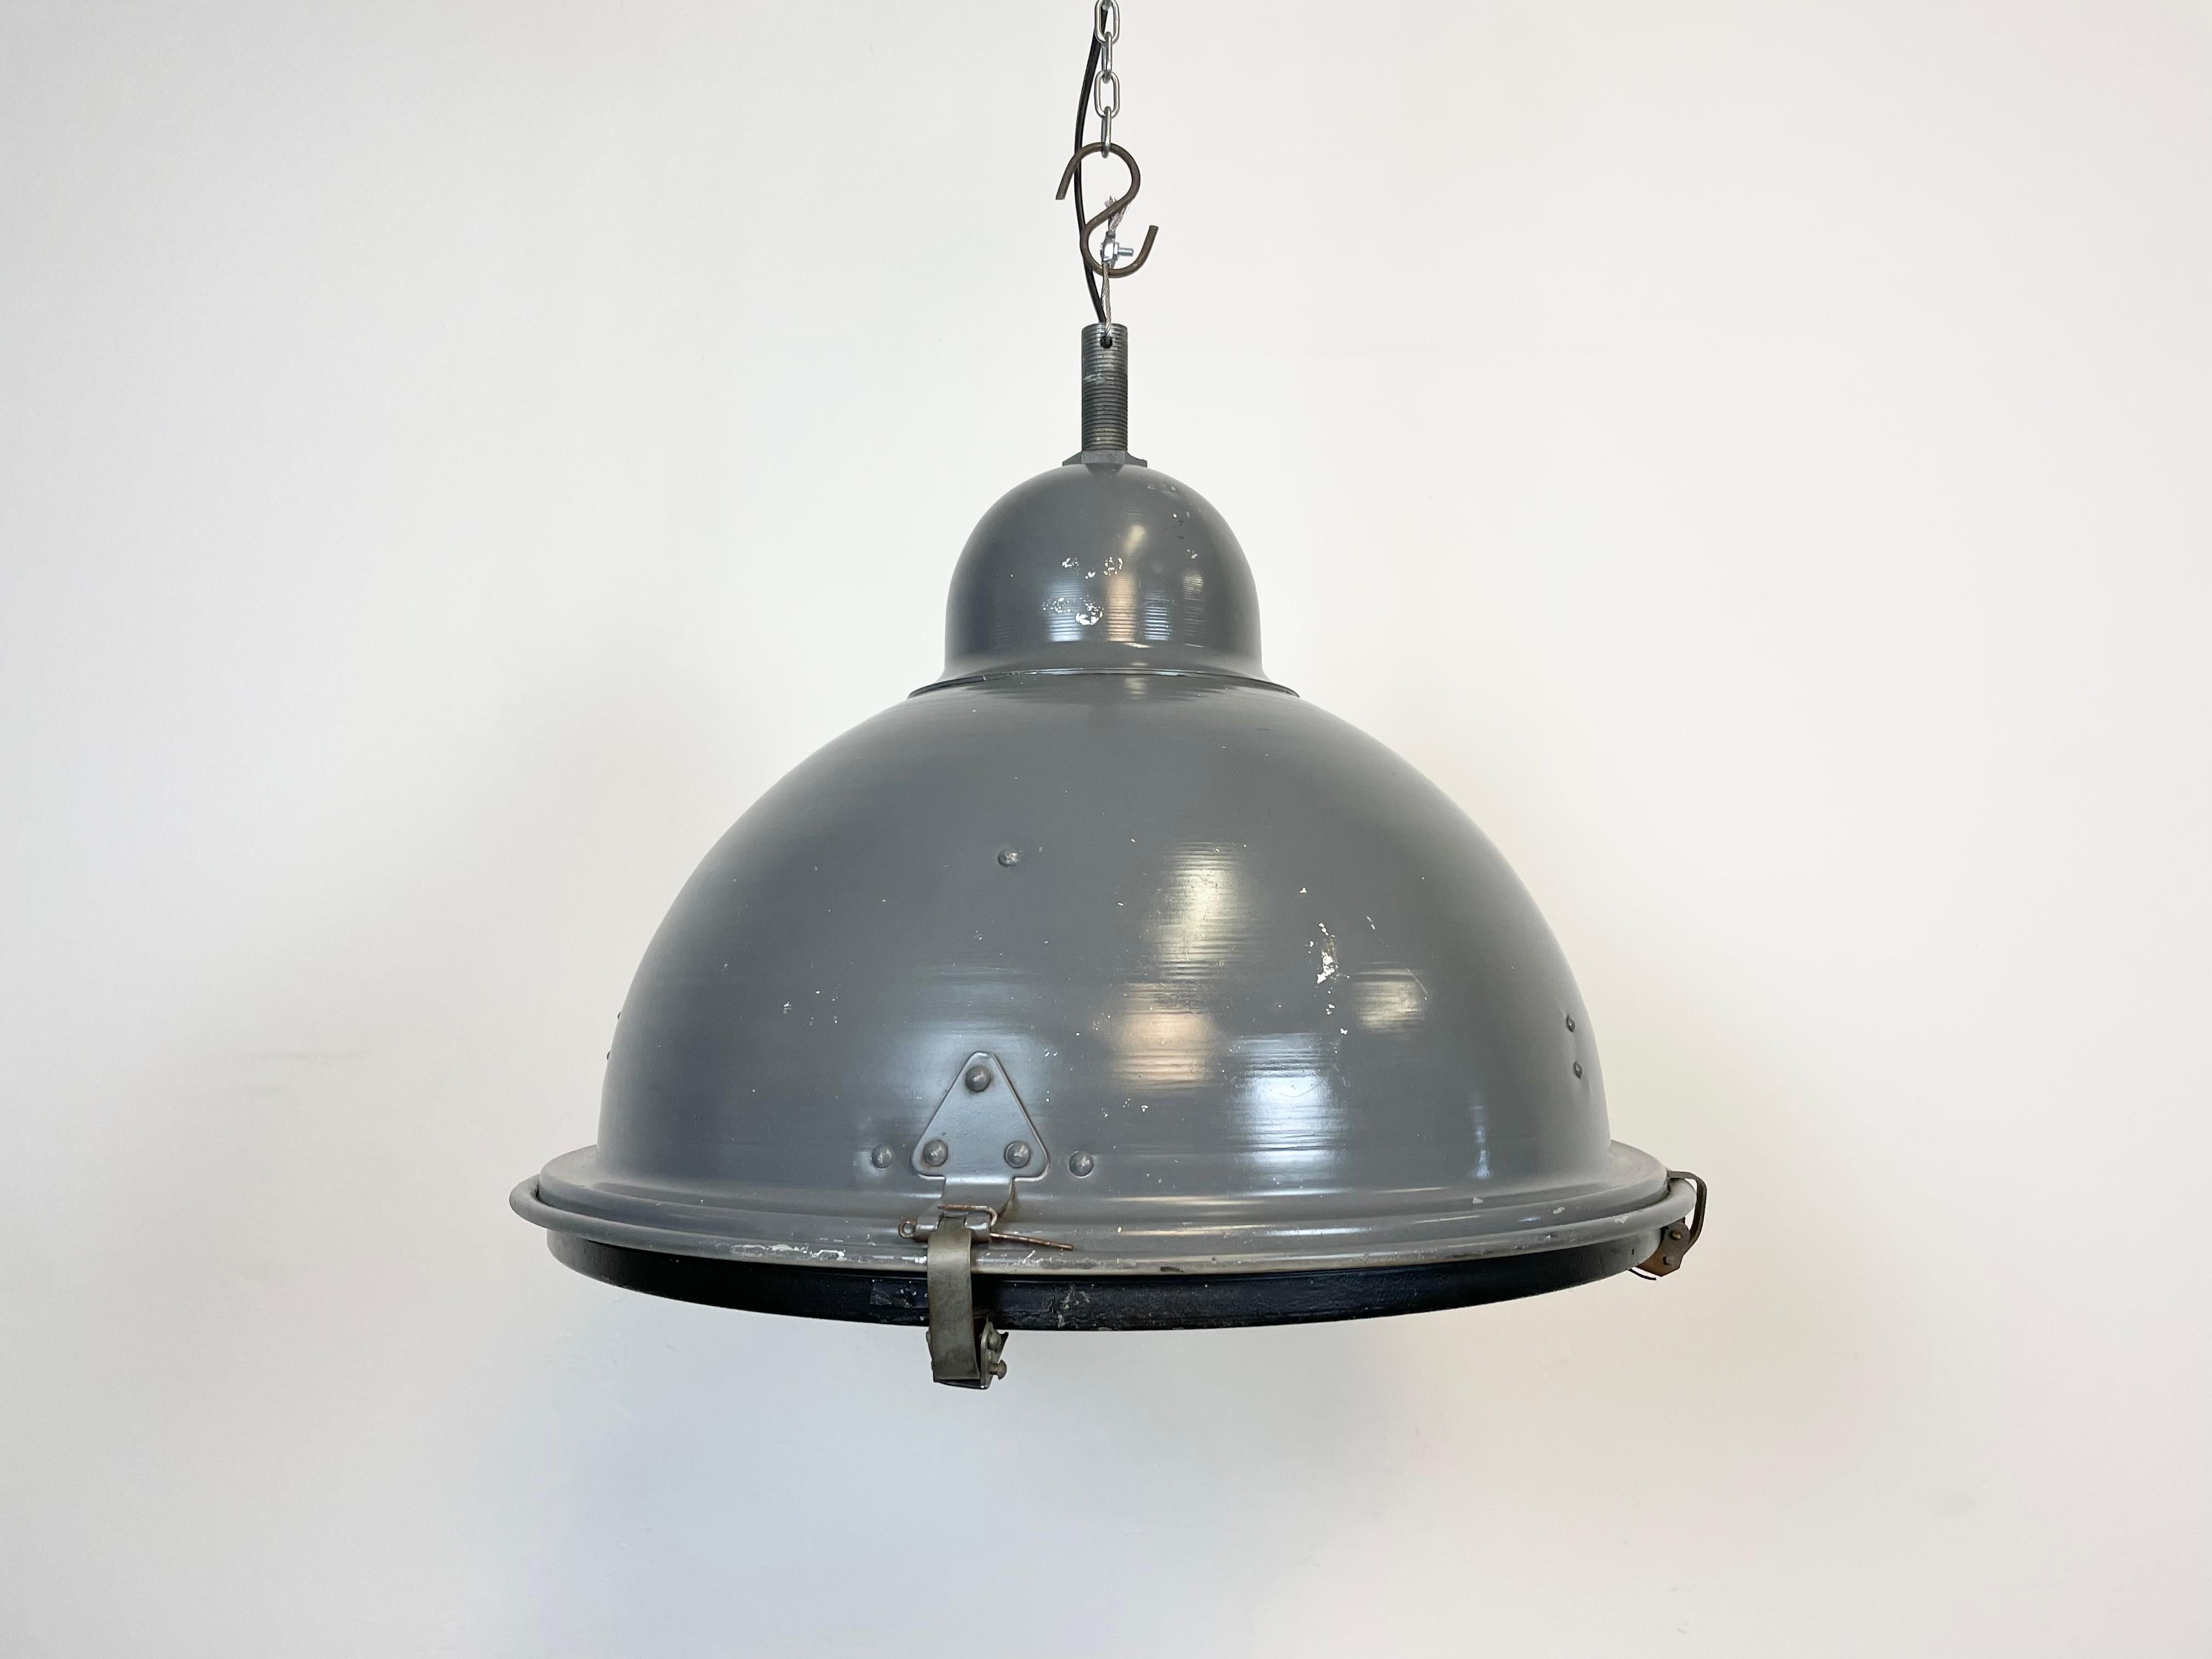 Vintage grey industrial factory aluminium pendant light made in Hungary during the 1970s. It features an aluminium body, an iron top and a clear glass cover. The socket requires E 27 light bulbs. The diameter of the shade is 46 cm. The weight of the